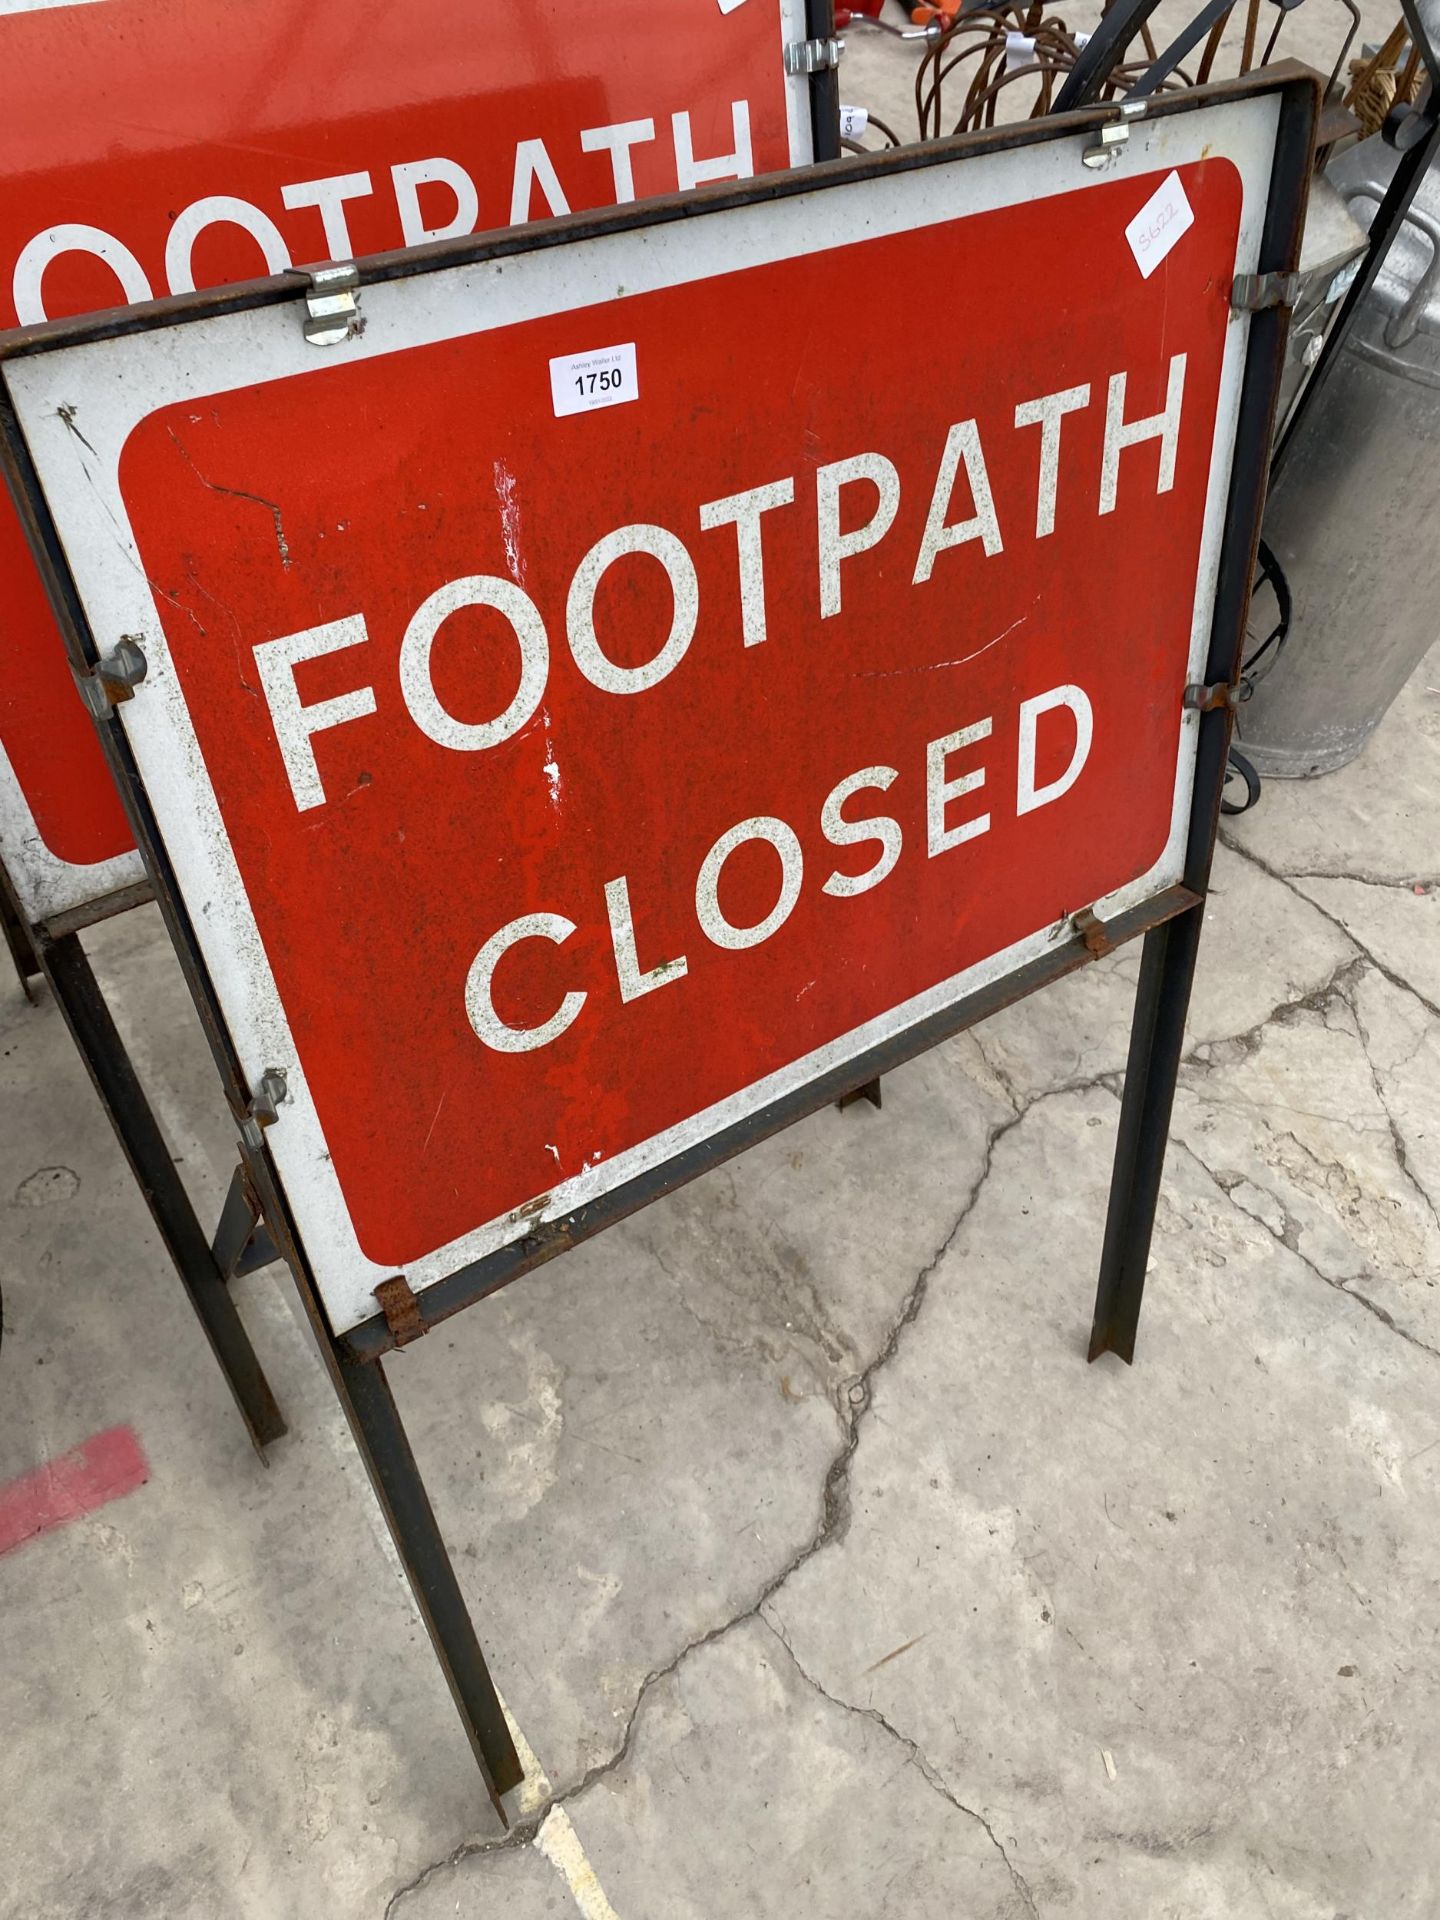 TWO FOOTPATH CLOSED ROAD SIGNS - Image 3 of 3